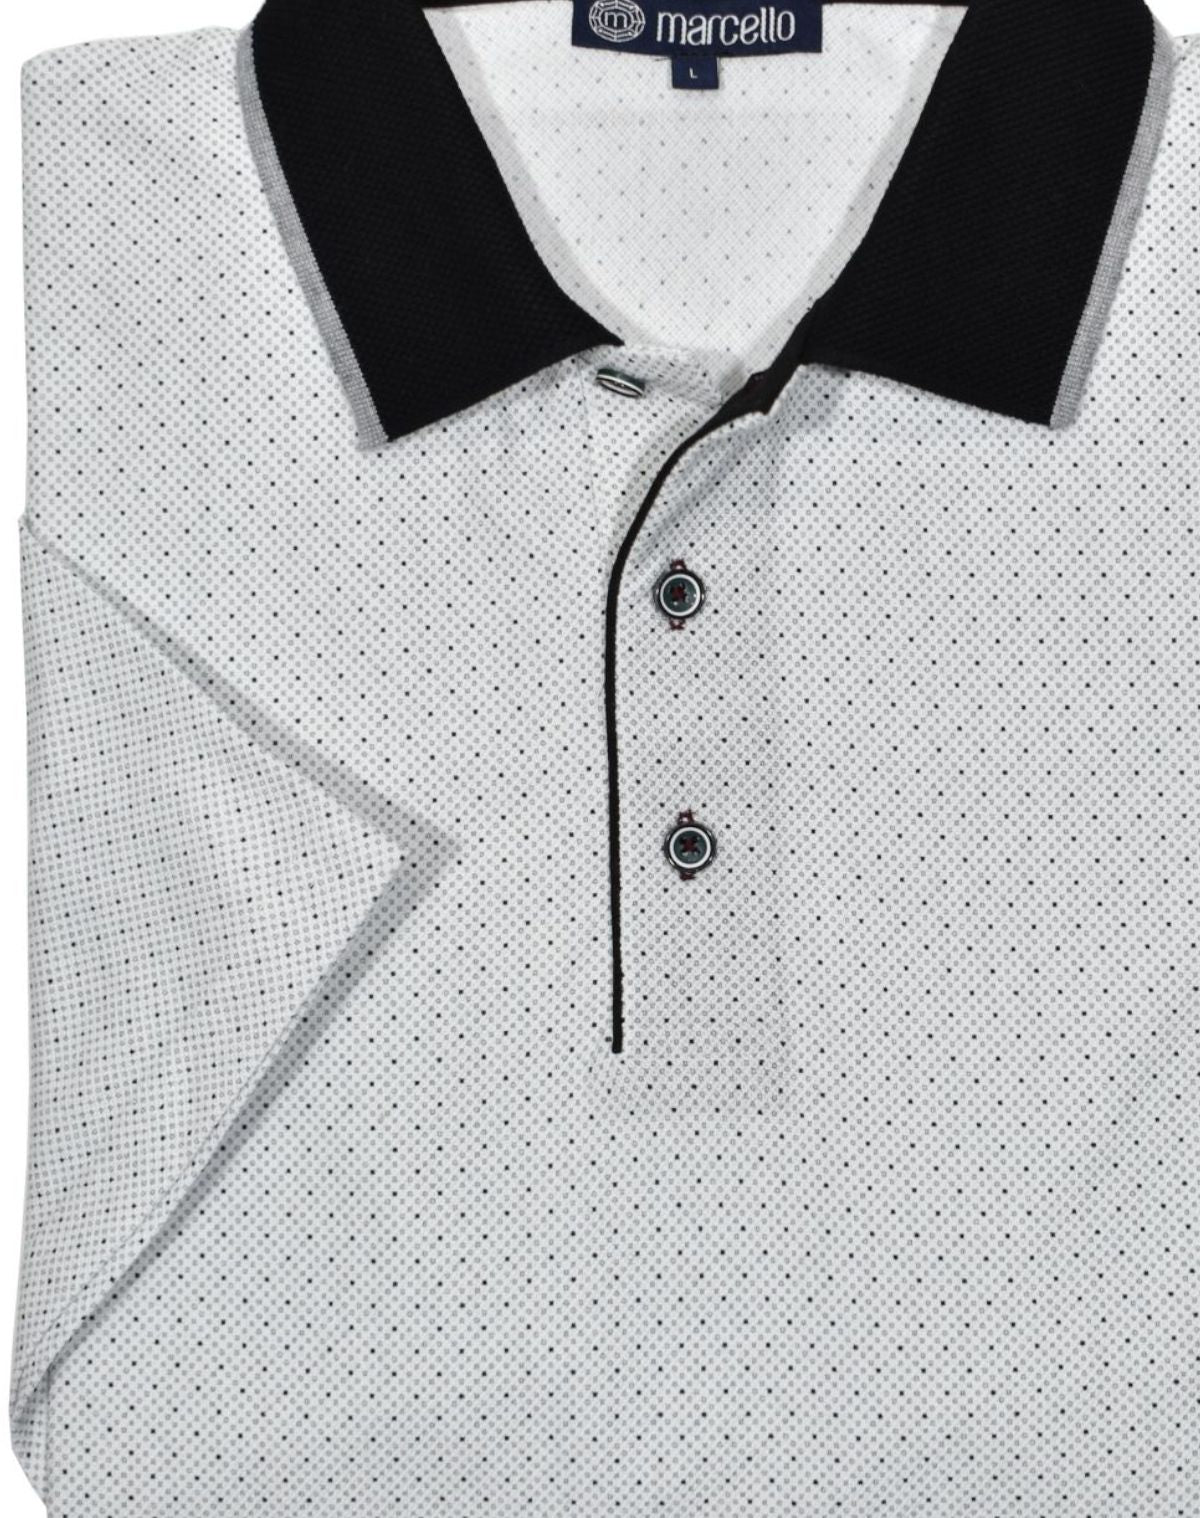 This ultra soft cotton pique polo looks timeless and feels lightweight. Its fine charcoal and black dot pattern, contrast trim fabric, open sleeves and custom buttons make it unique and stylish. Enjoy its classic fit and timeless look.